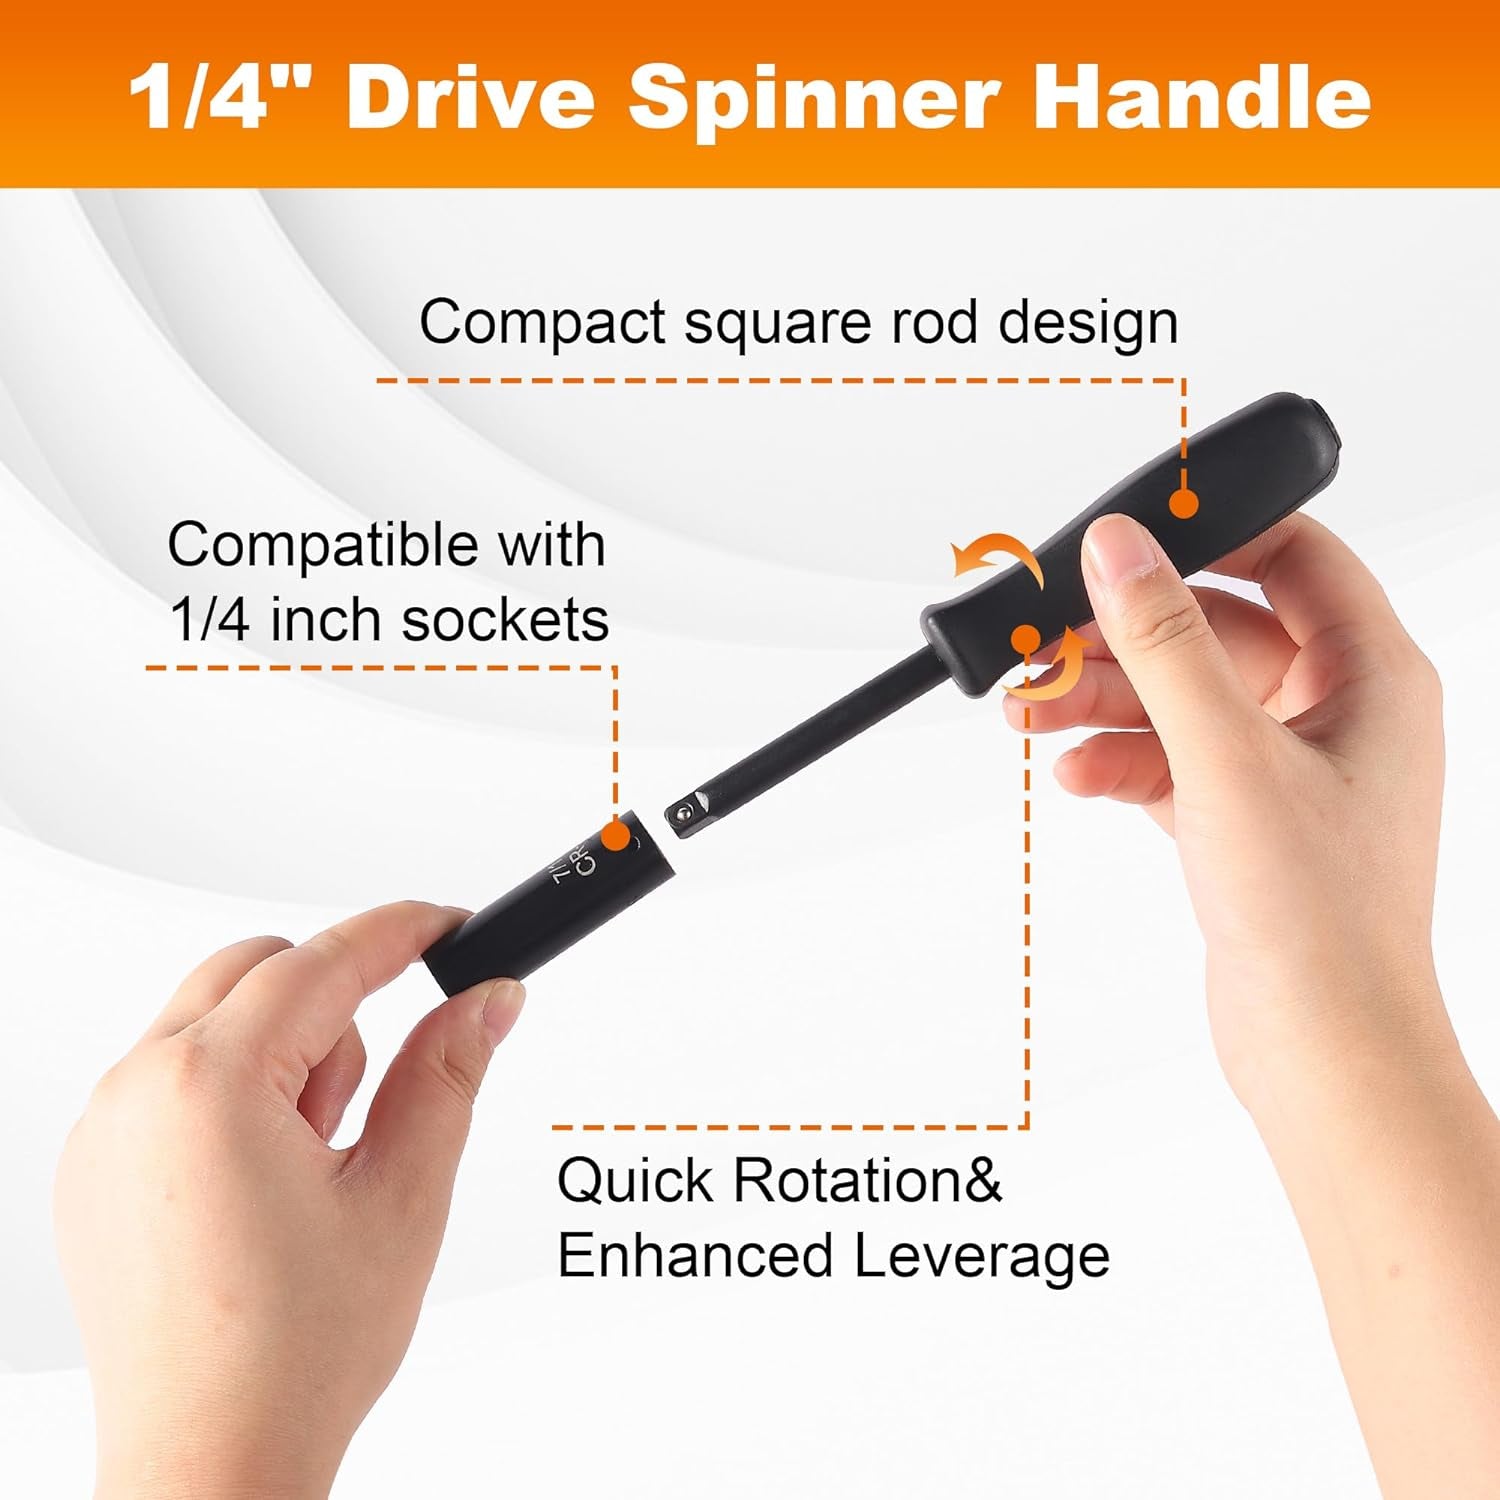 13-Piece 1/4" Drive Socket Set 72-Tooth Ratchet Wrench, Drive Spinner Handle, 6 Point Design